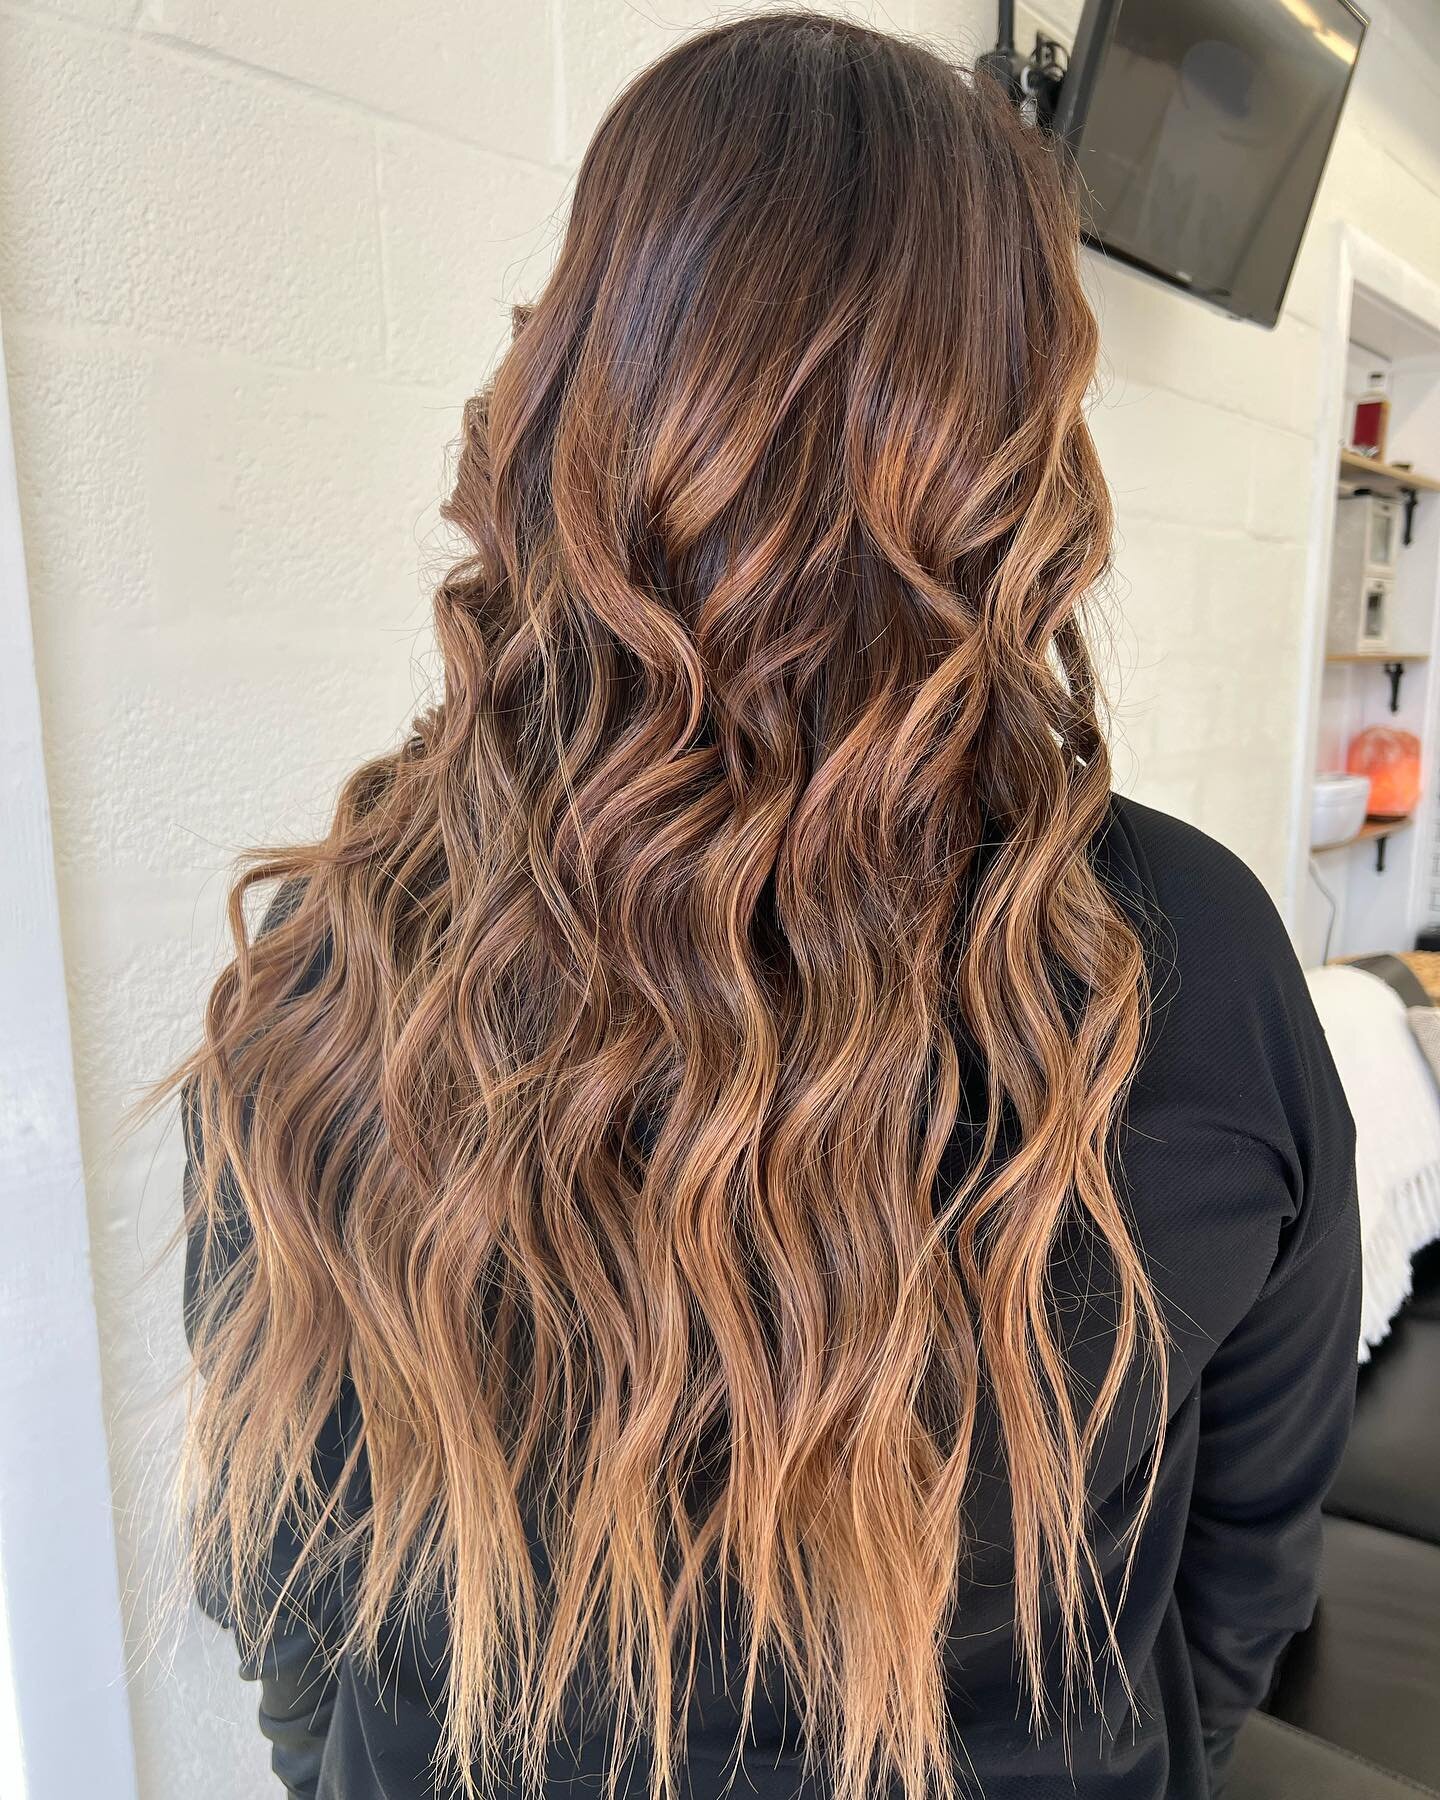 Yowza 🤩 ✨ 
&hellip;this could be your dream hair too! 

18&rdquo; balayaged @haloprofessional install on @allisonbpage @allisonpagephoto by @heatherschair 

Colored previously by @hairbylarissa_h using @wella color and styled with only @bumbleandbum